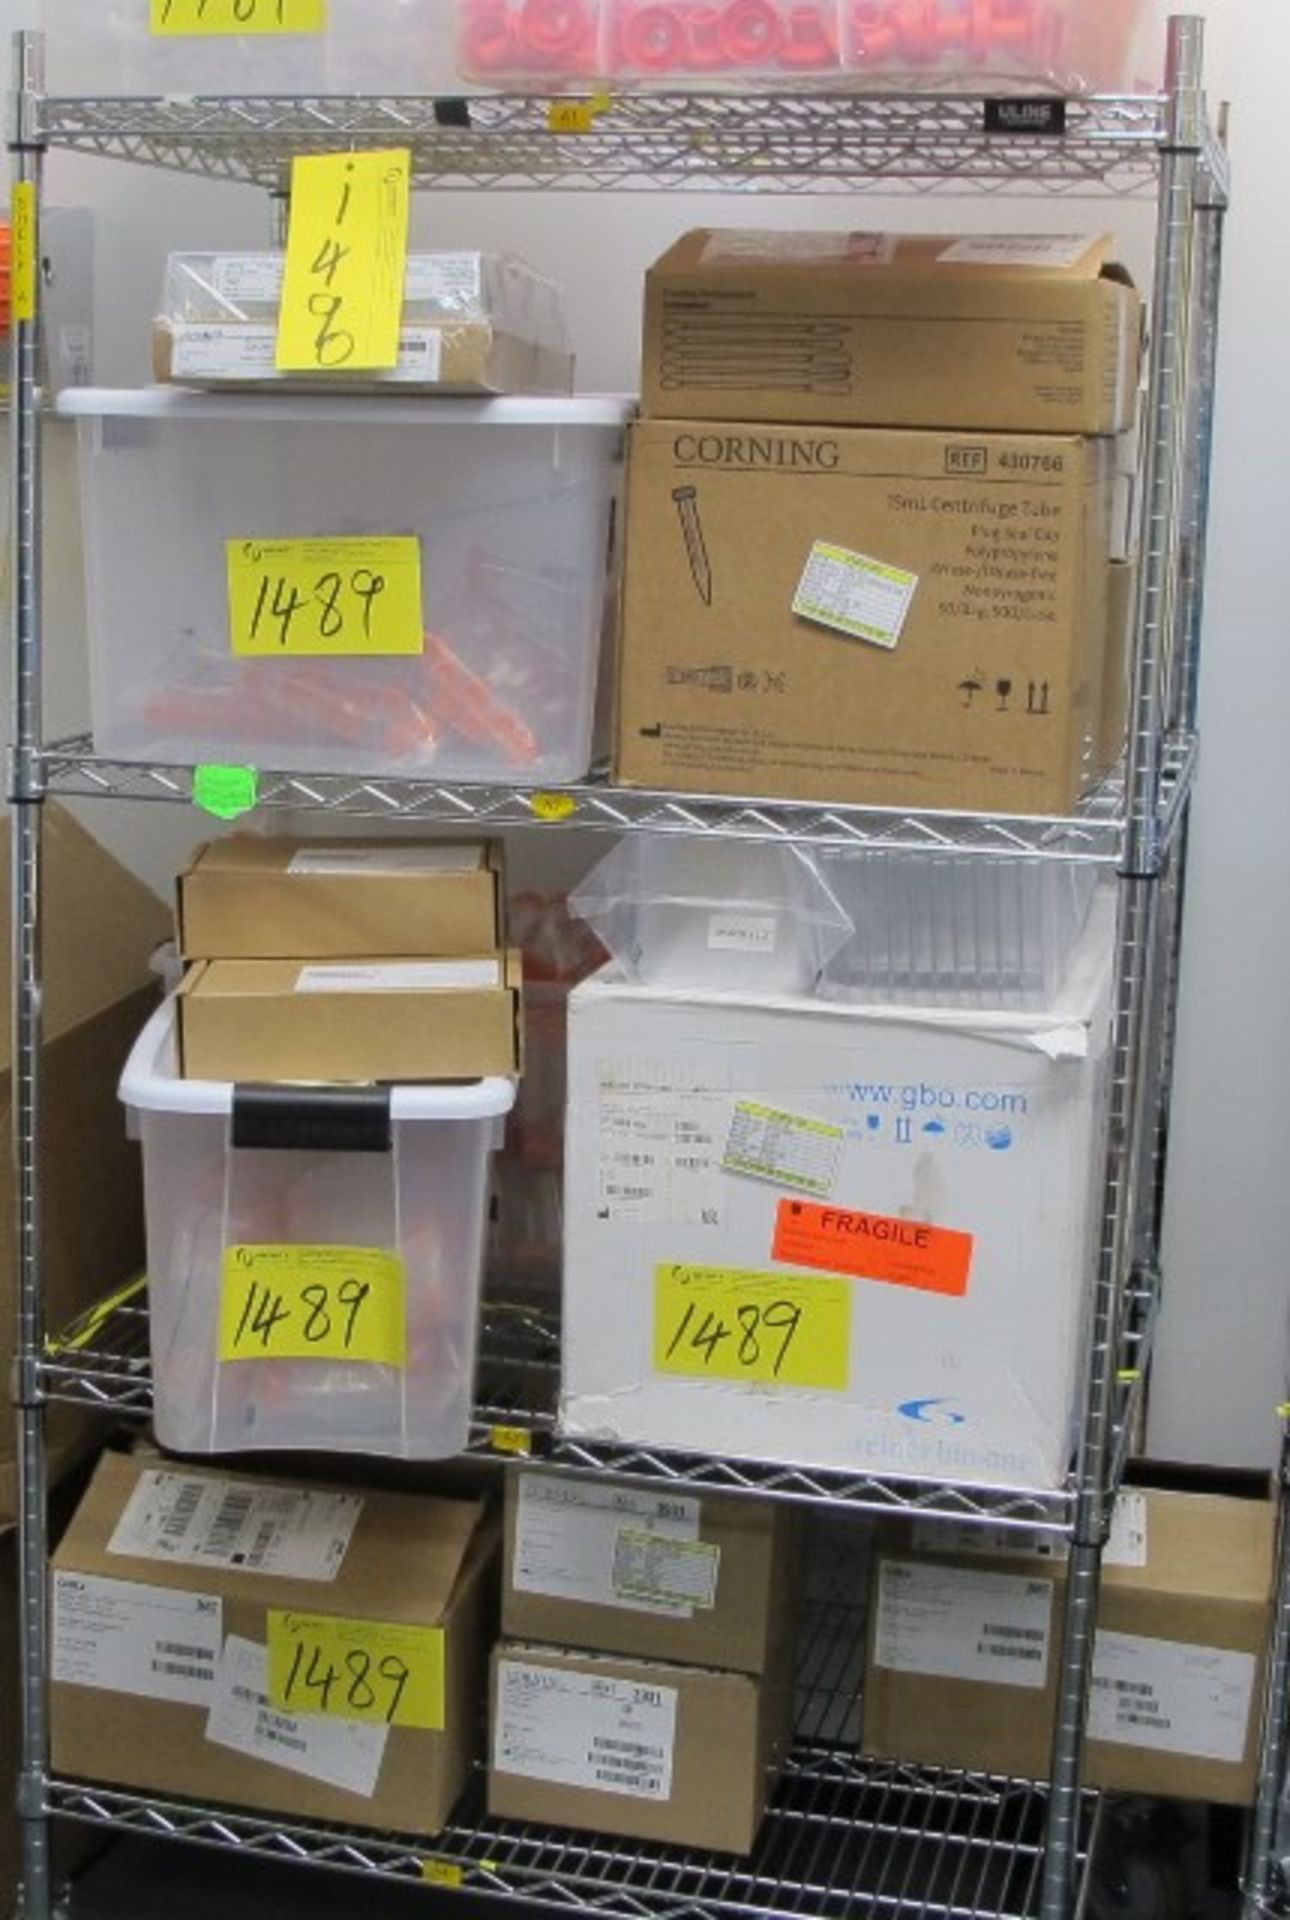 LOT ASST. CENTRIFUGE TUBES, PIPETTE TIPS, STORAGE PLATES, ETC. (CONTENTS OF RACK, RACK NOT INCLUDED)